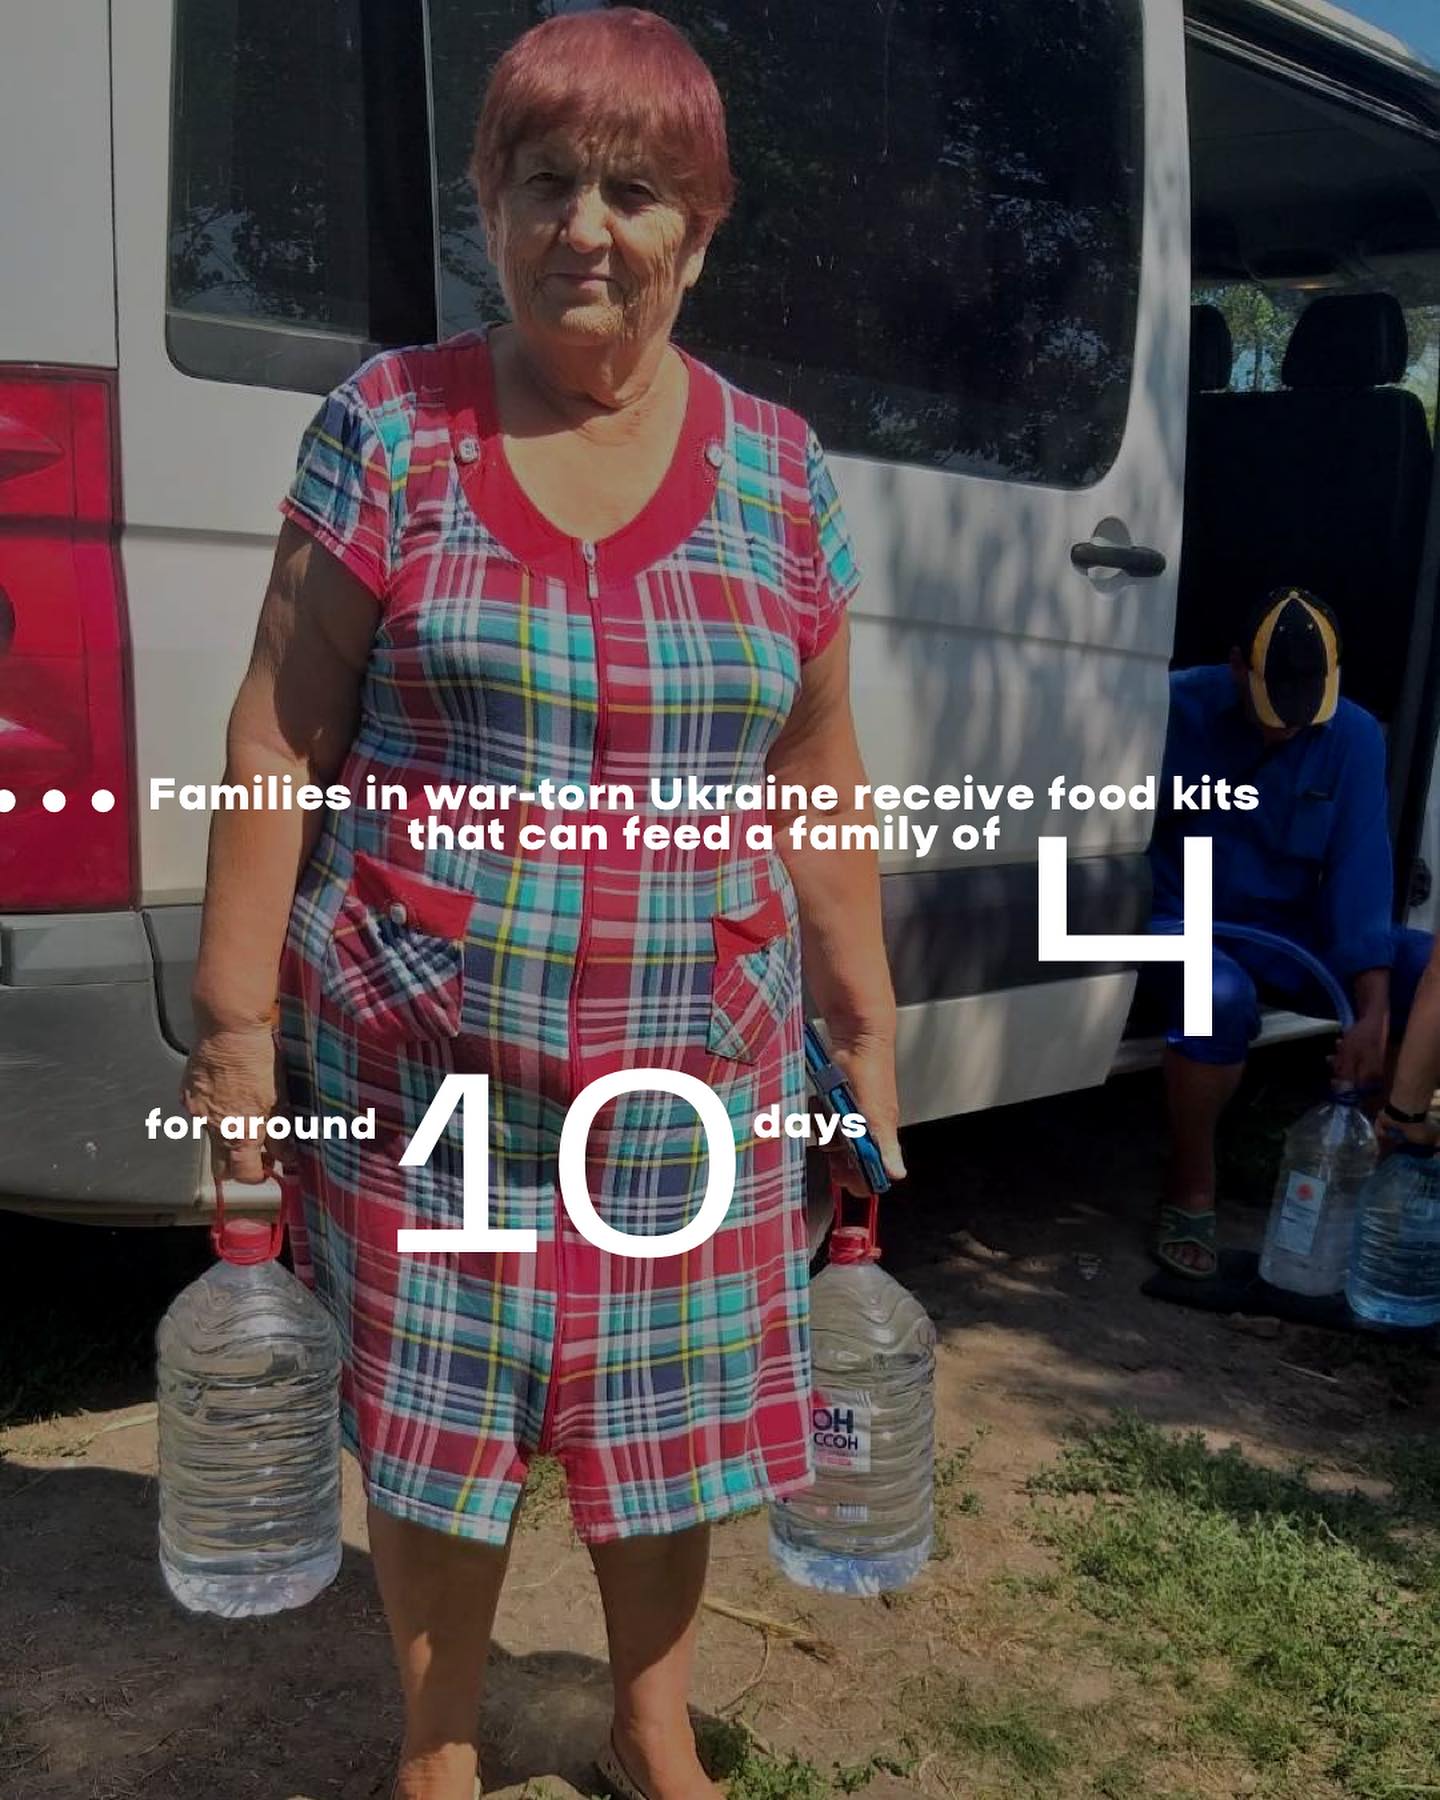 A woman is standing in front of a van with water bottles.